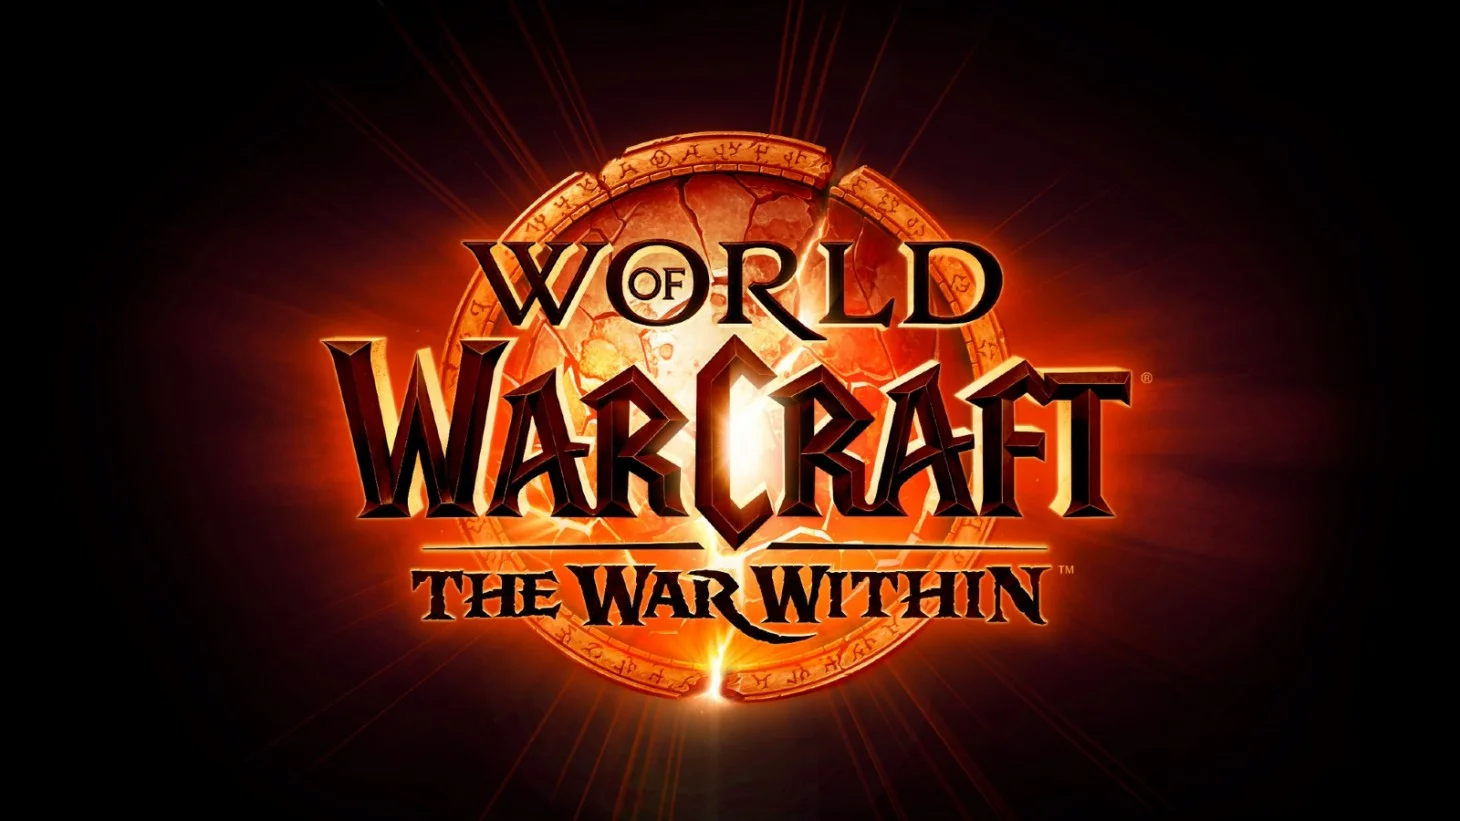 Blizzard has released a new trailer for World of Warcraft: The War Within, in which the DLC release date was announced - 26 August